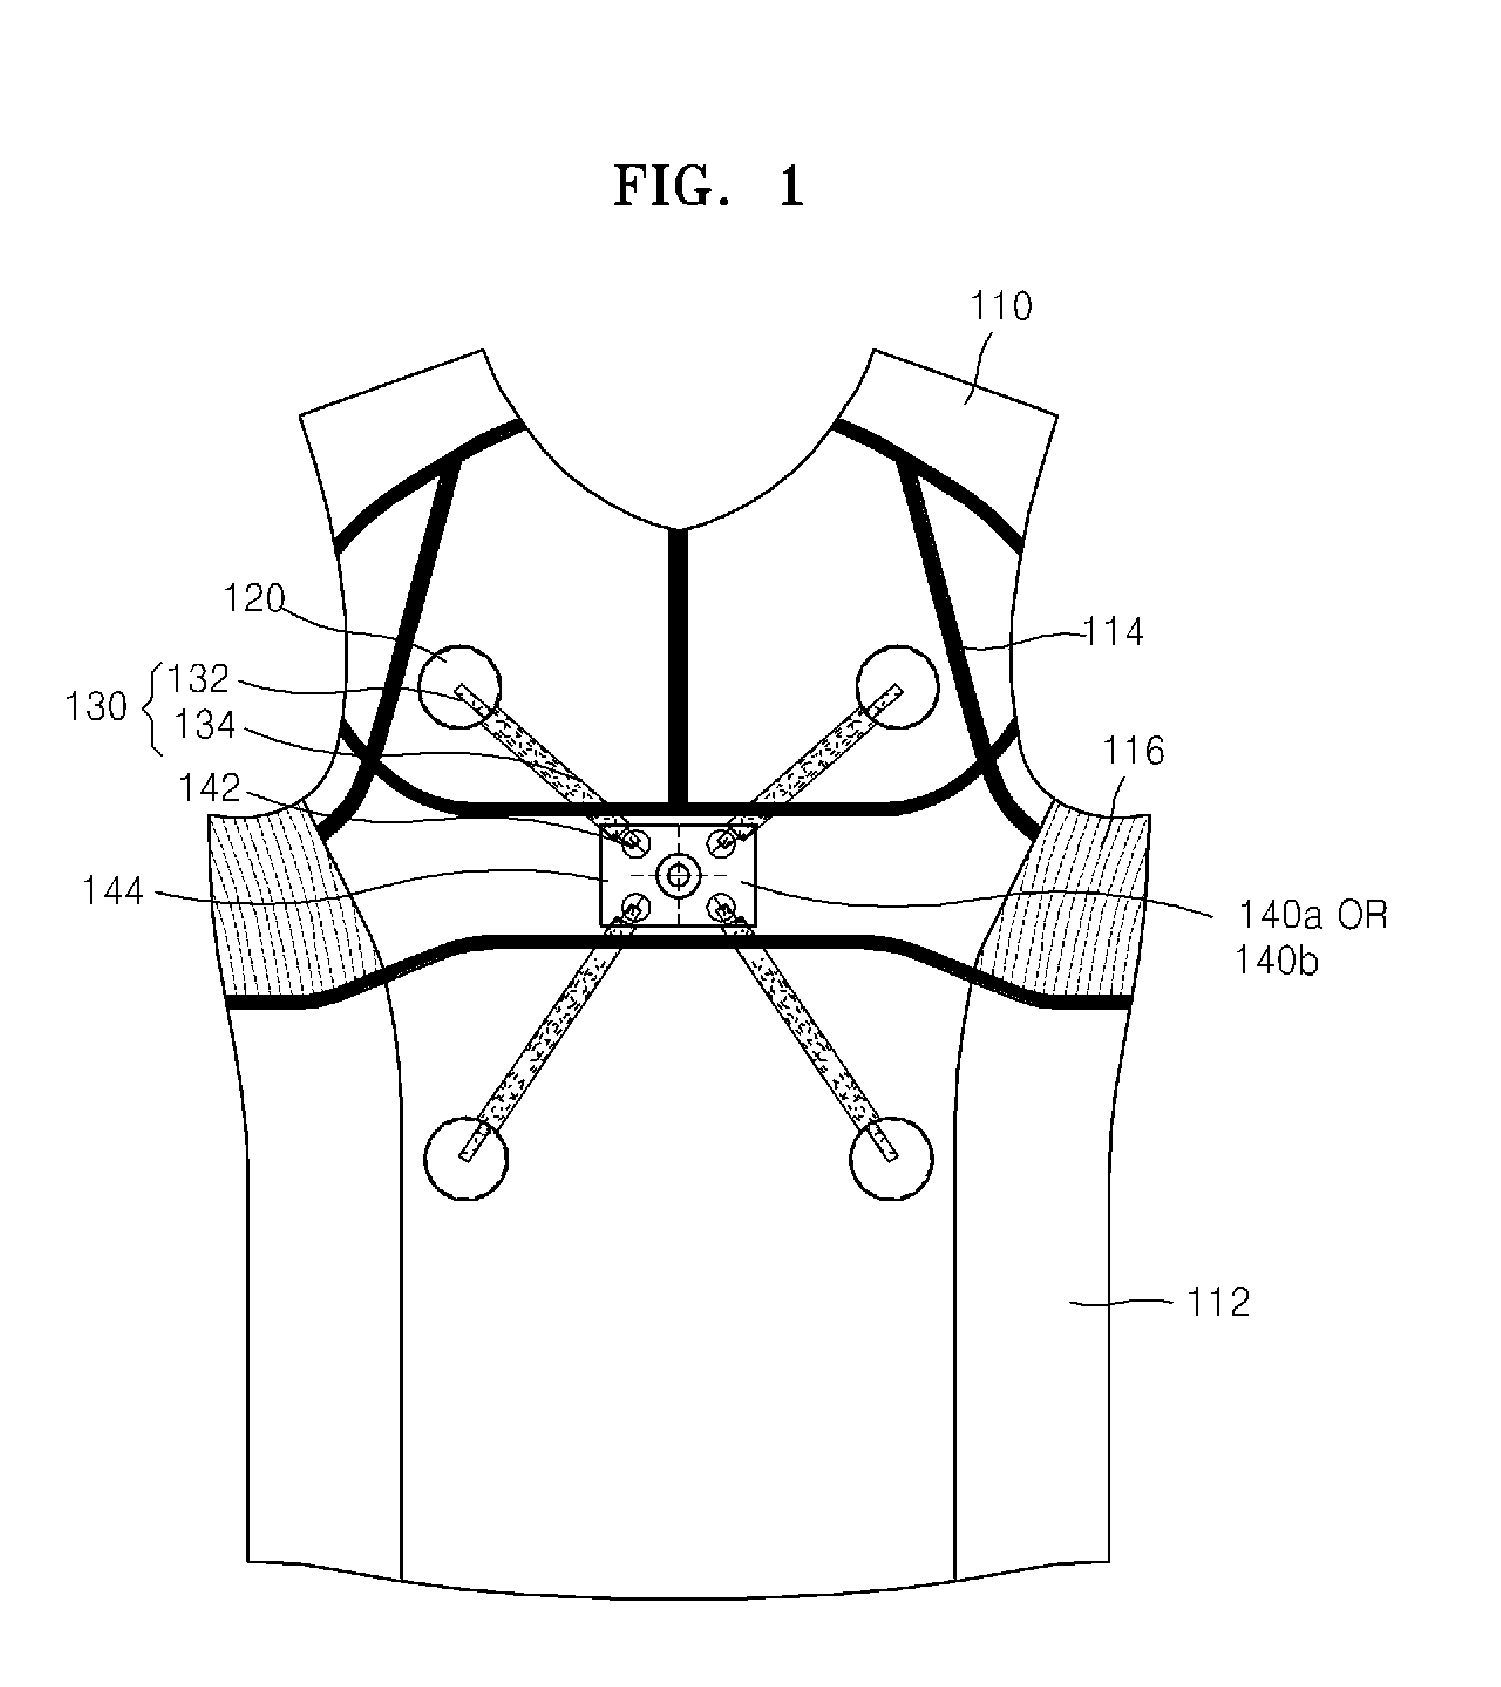 Garment for measuring physiological signal and system for processing physiological signal